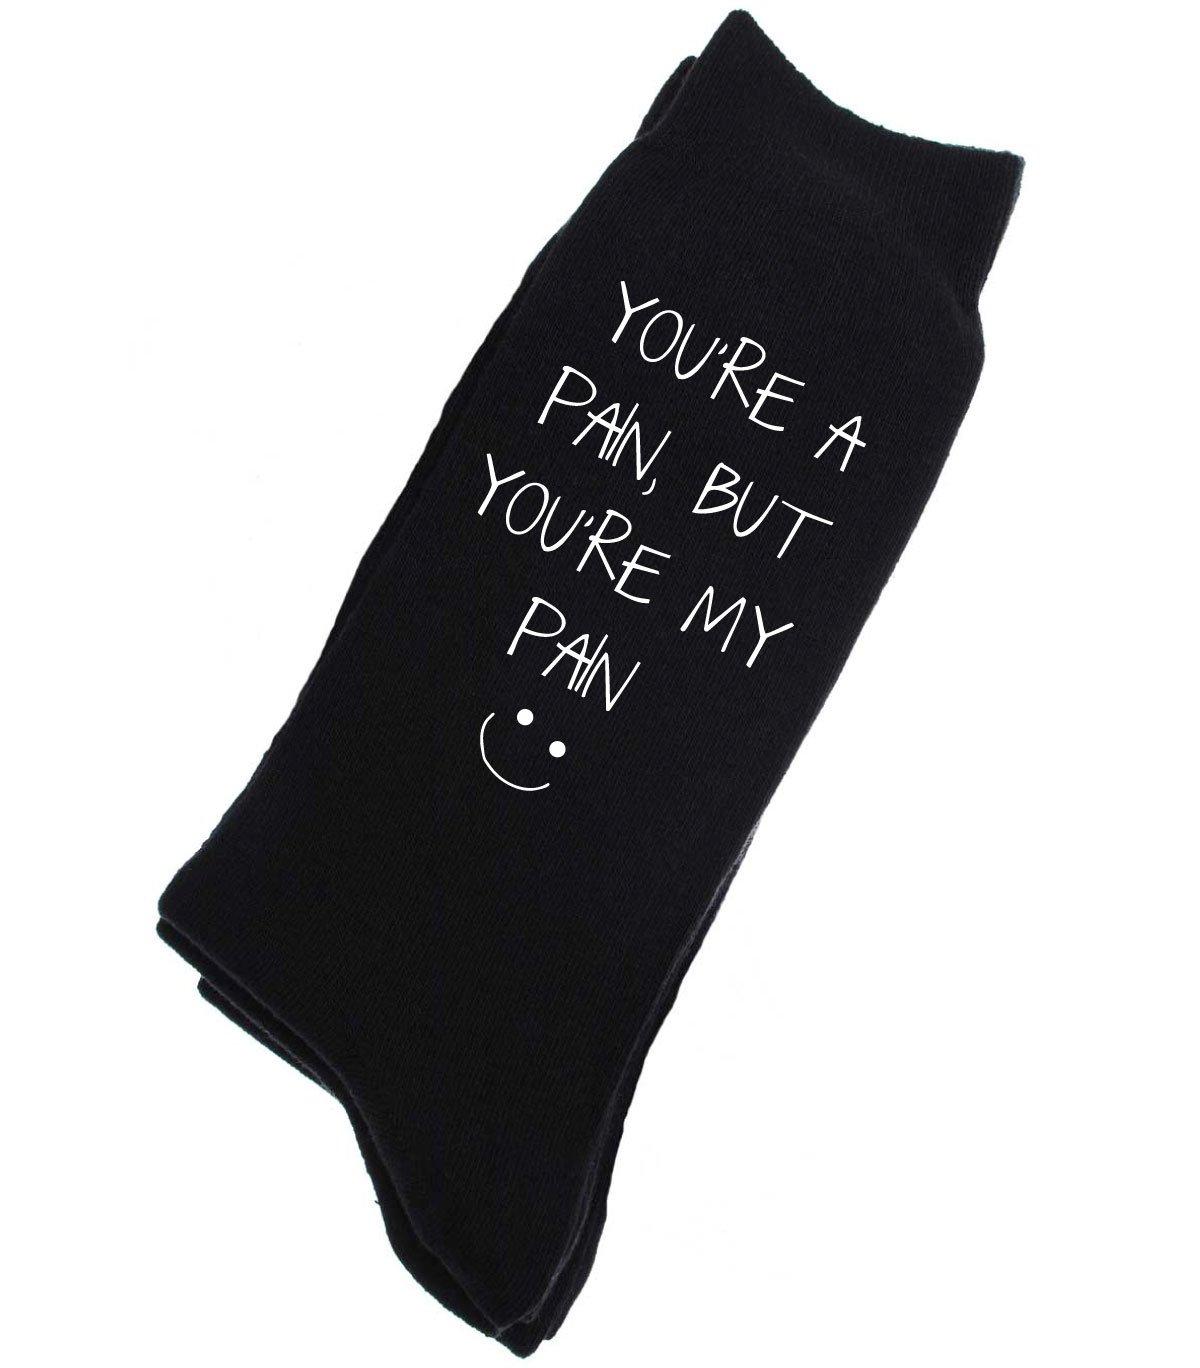 You're A Pain But You're My Pain Mens Black Calf Socks